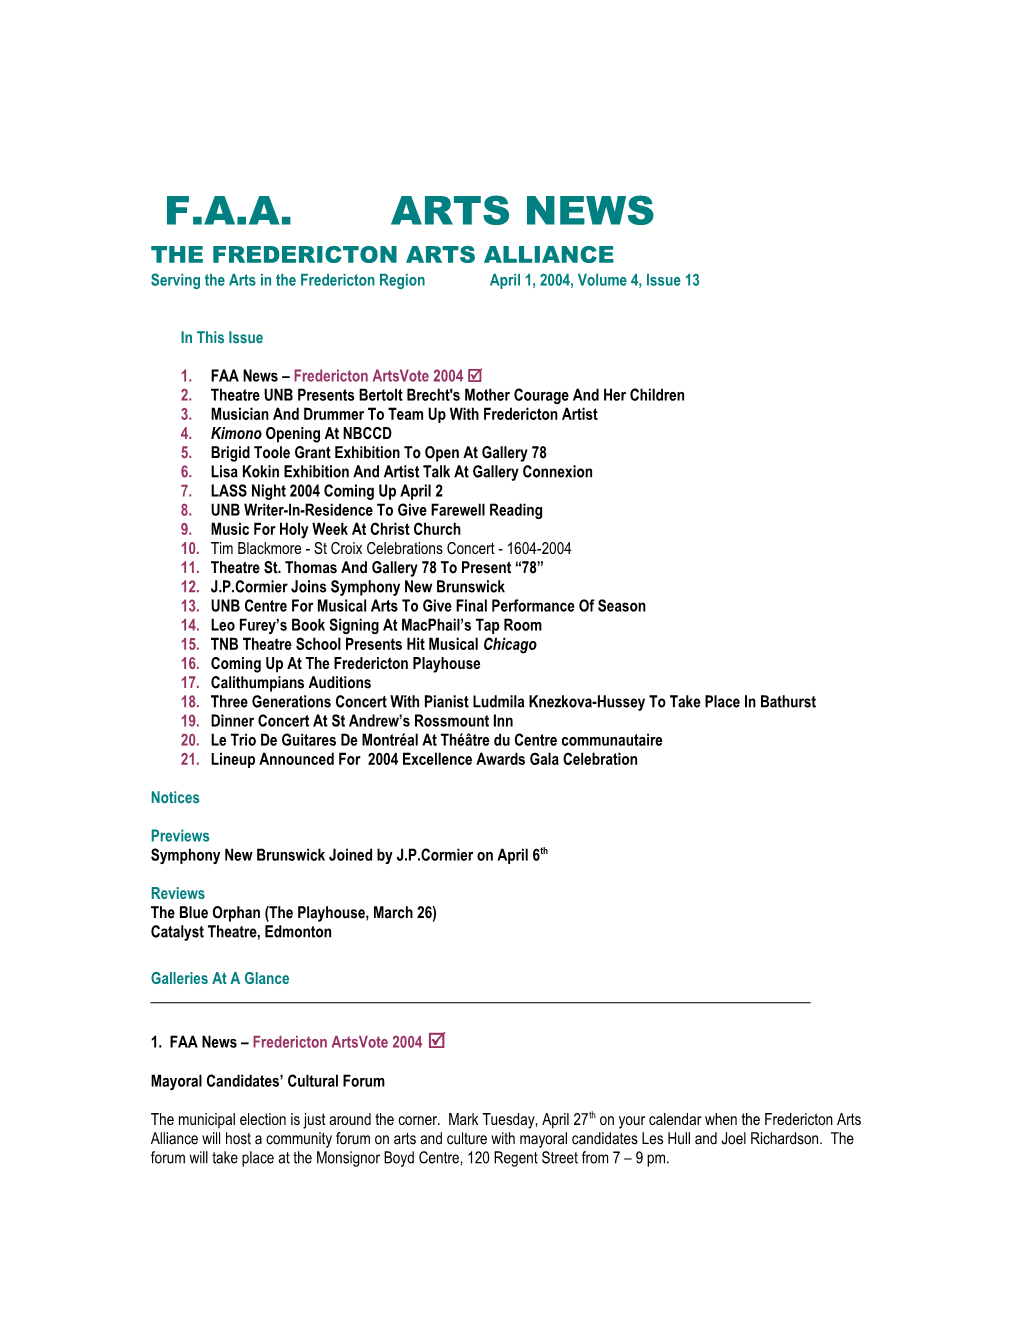 F.A.A. ARTS NEWS the FREDERICTON ARTS ALLIANCE Serving the Arts in the Fredericton Region April 1, 2004, Volume 4, Issue 13